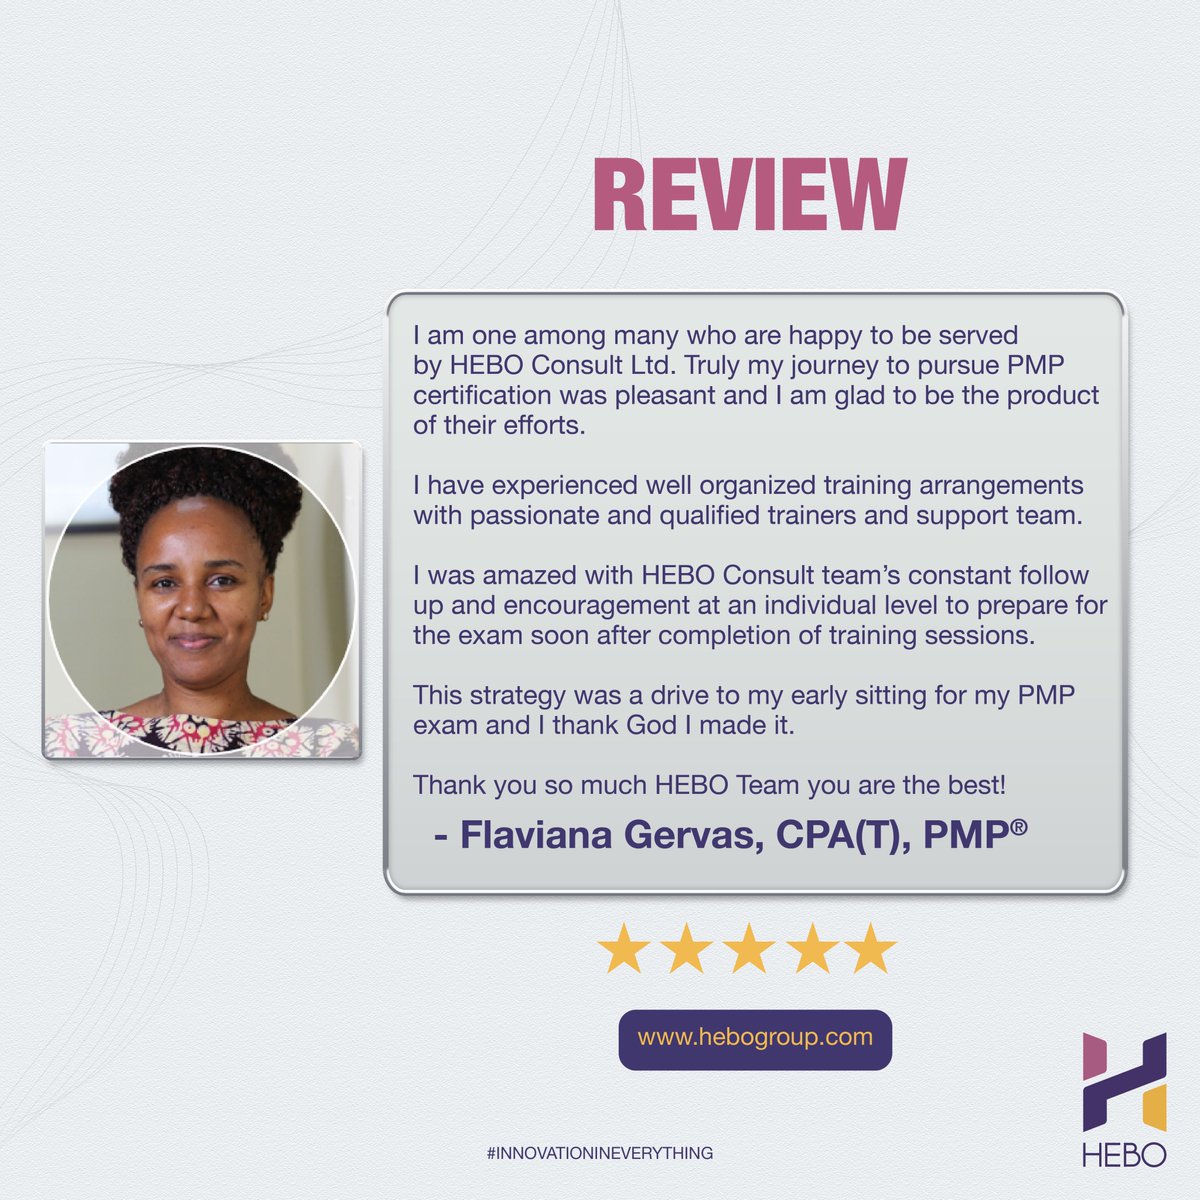 #TuesdayTestimony Thank you #Flaviana for your lovely feedback. We are happy to see you succeed and we are proud and grateful to be part of your success story #PMP club #ProjectManagementProfessionals #EastAfrica #PMI #HEBO